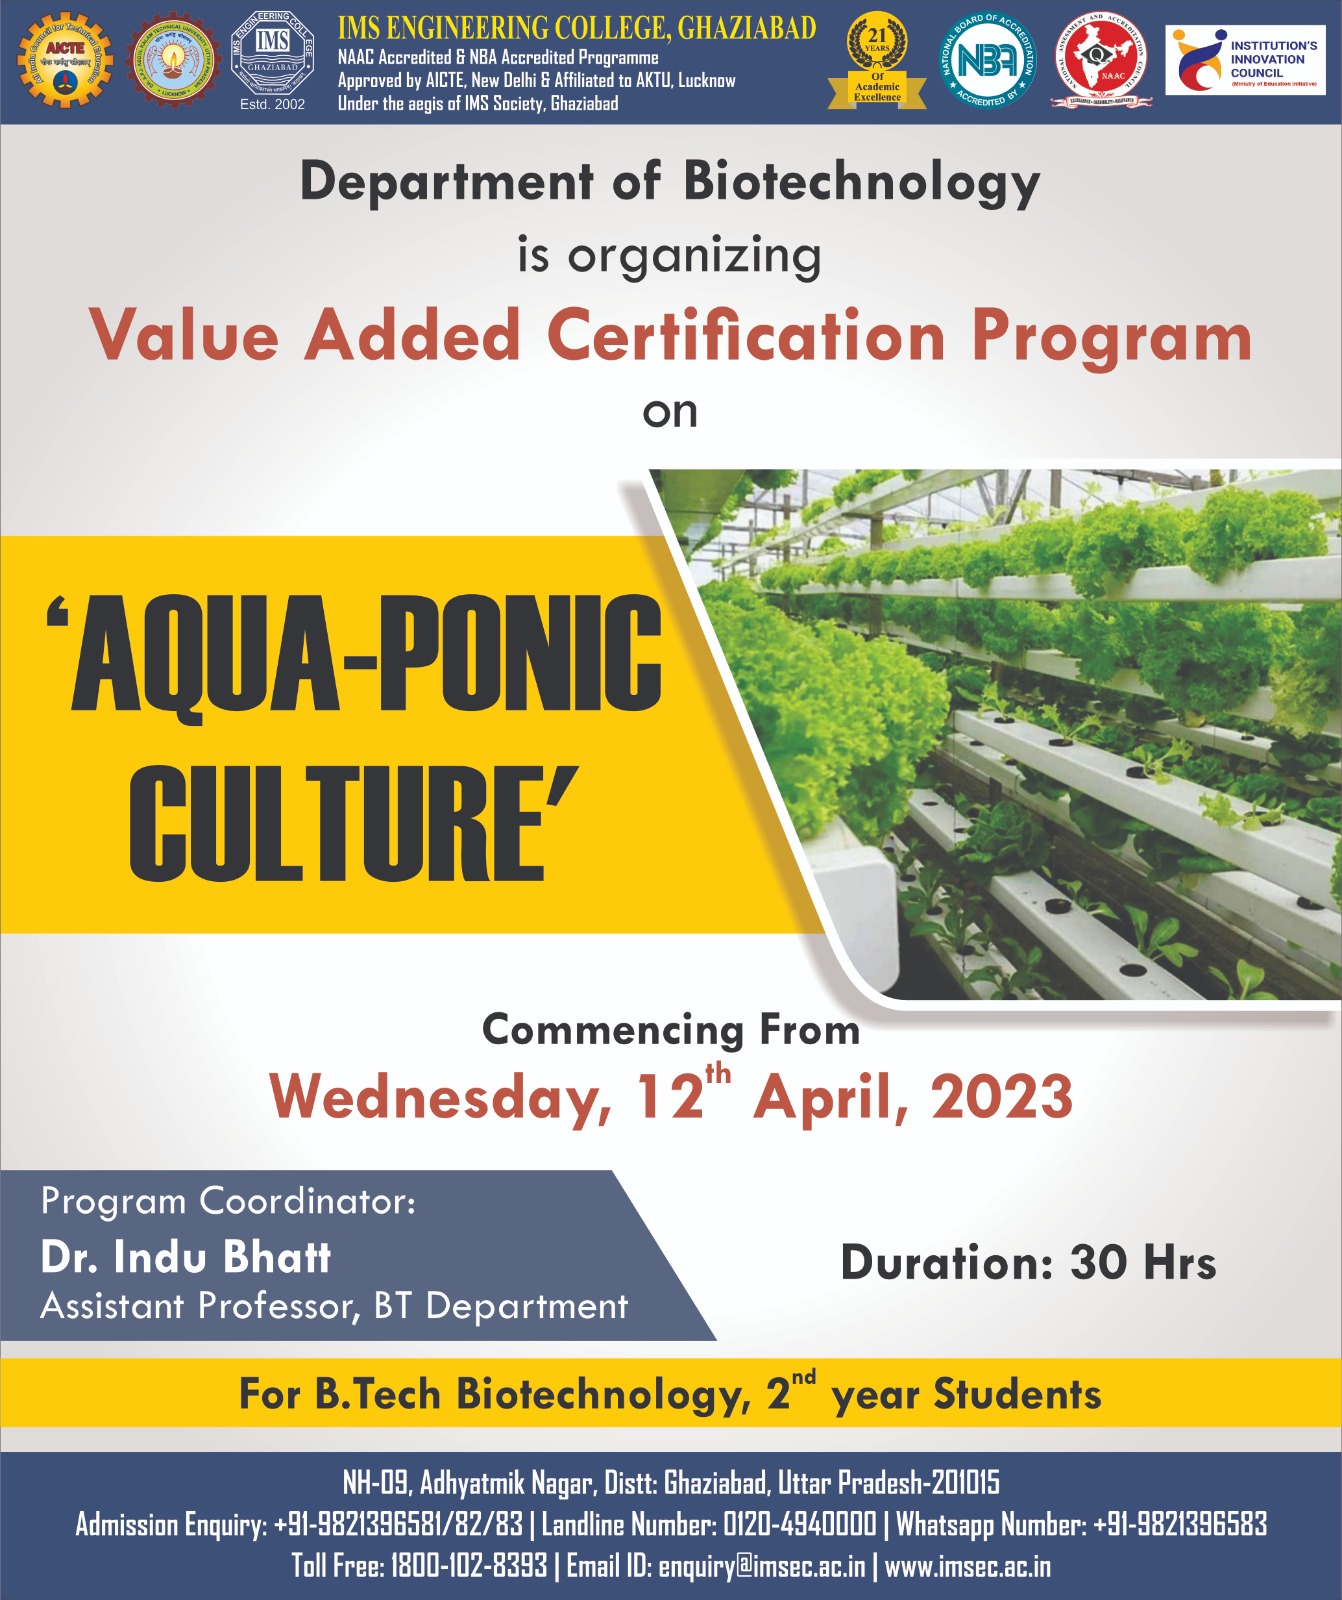 Value Added Certification Program on Aqua-ponic Culture and Microbial Techniques